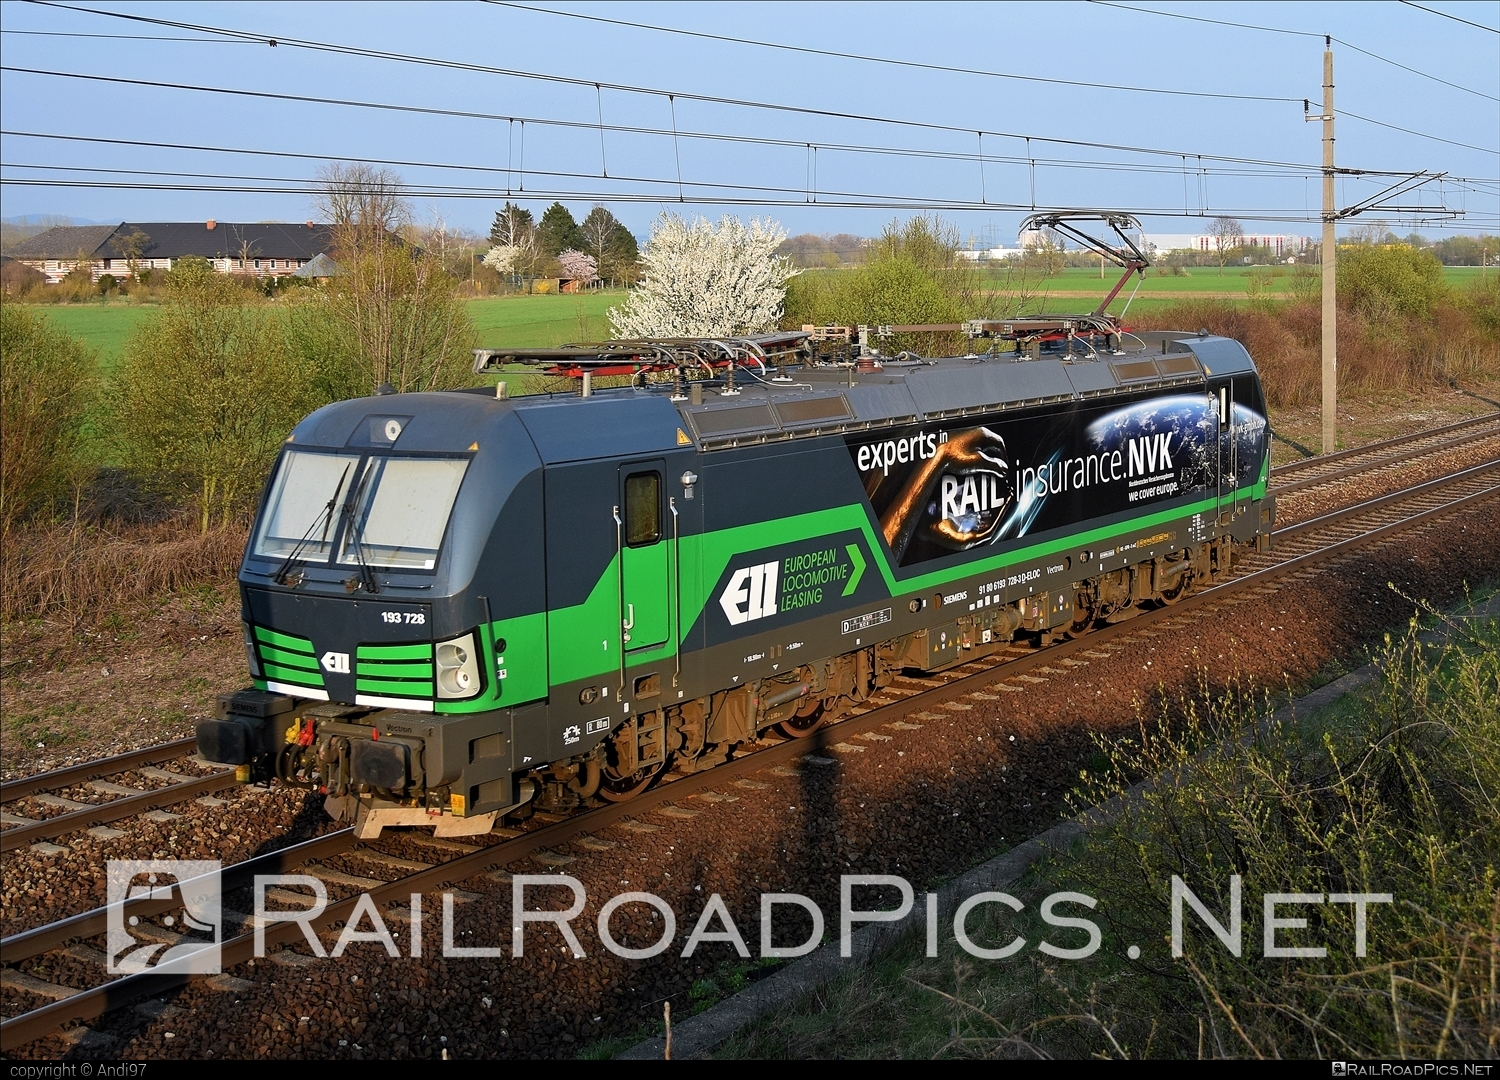 Siemens Vectron MS - 193 728 operated by LTE Logistik und Transport GmbH #ell #ellgermany #eloc #europeanlocomotiveleasing #lte #ltelogistikundtransport #ltelogistikundtransportgmbh #siemens #siemensVectron #siemensVectronMS #vectron #vectronMS